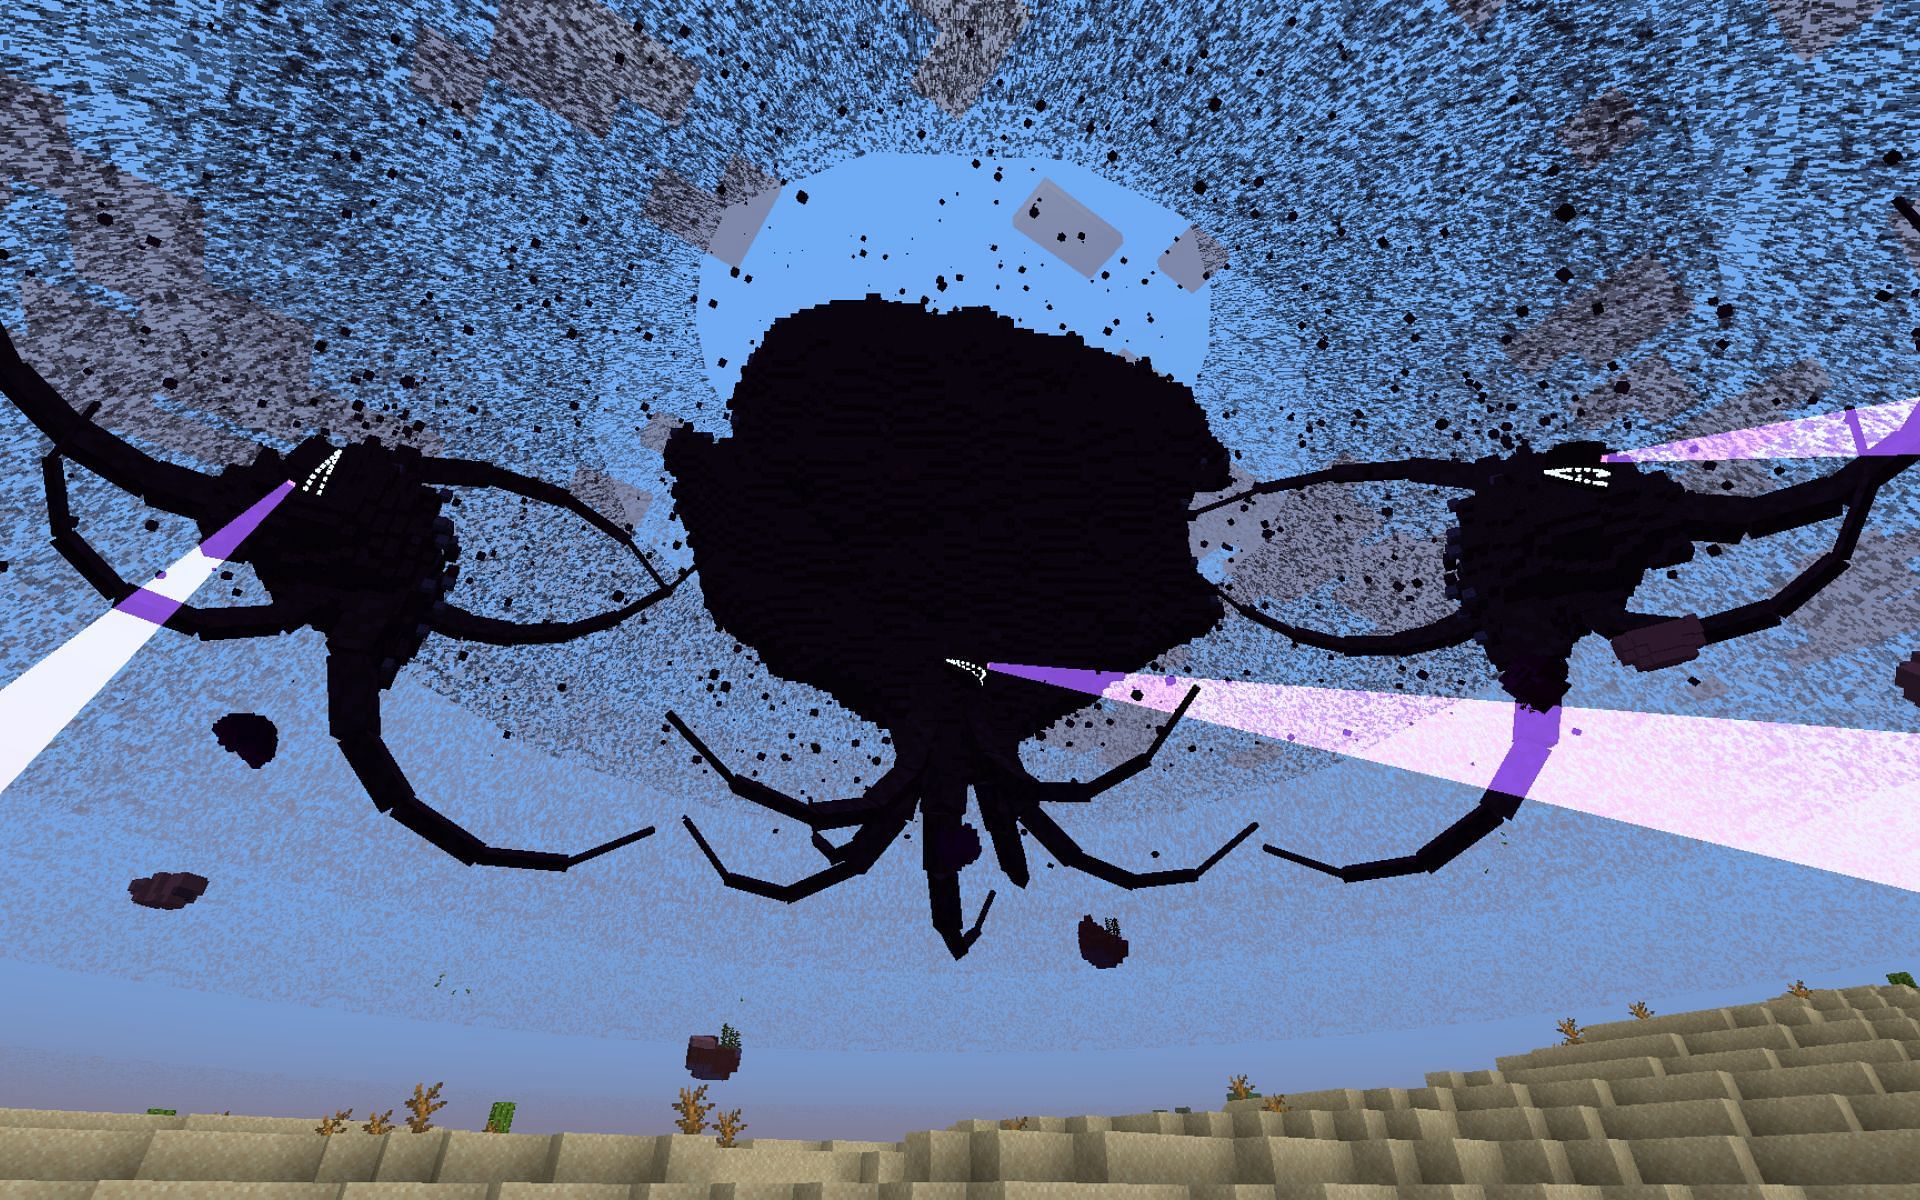 How To Spawn a Wither Storm in Minecraft Pocket Edition with Addons (Wither  Storm Addon) 